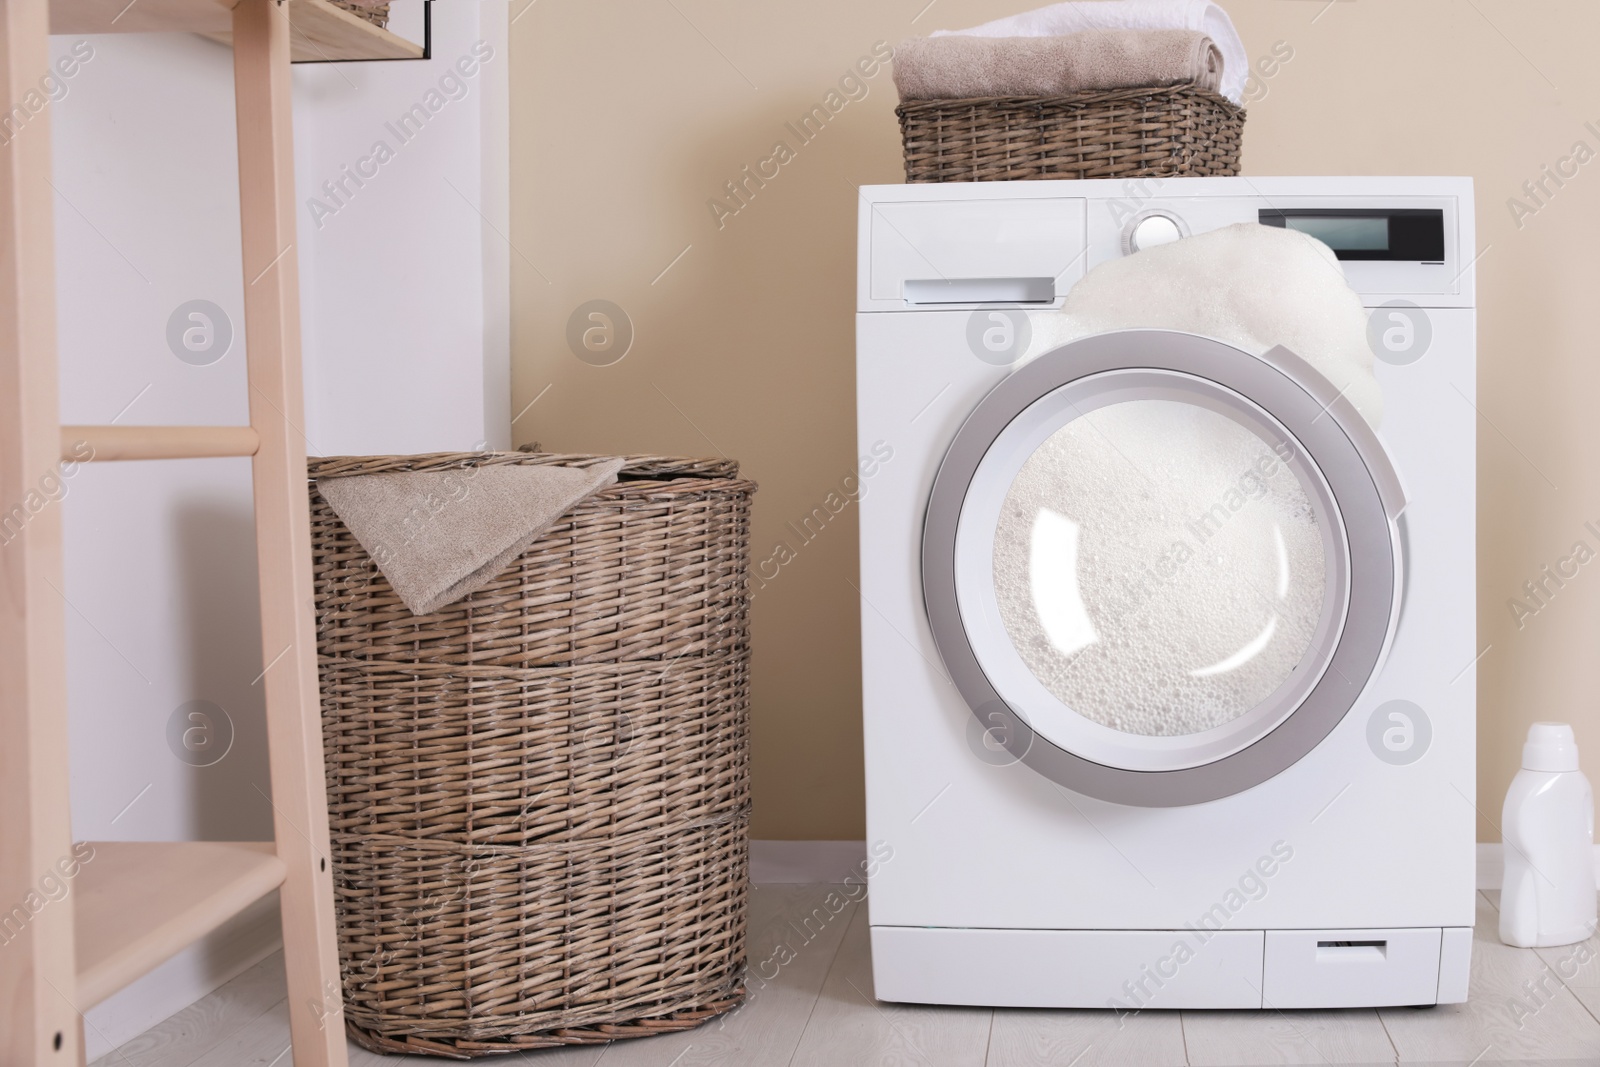 Image of Foam coming out from broken washing machine during laundering in room